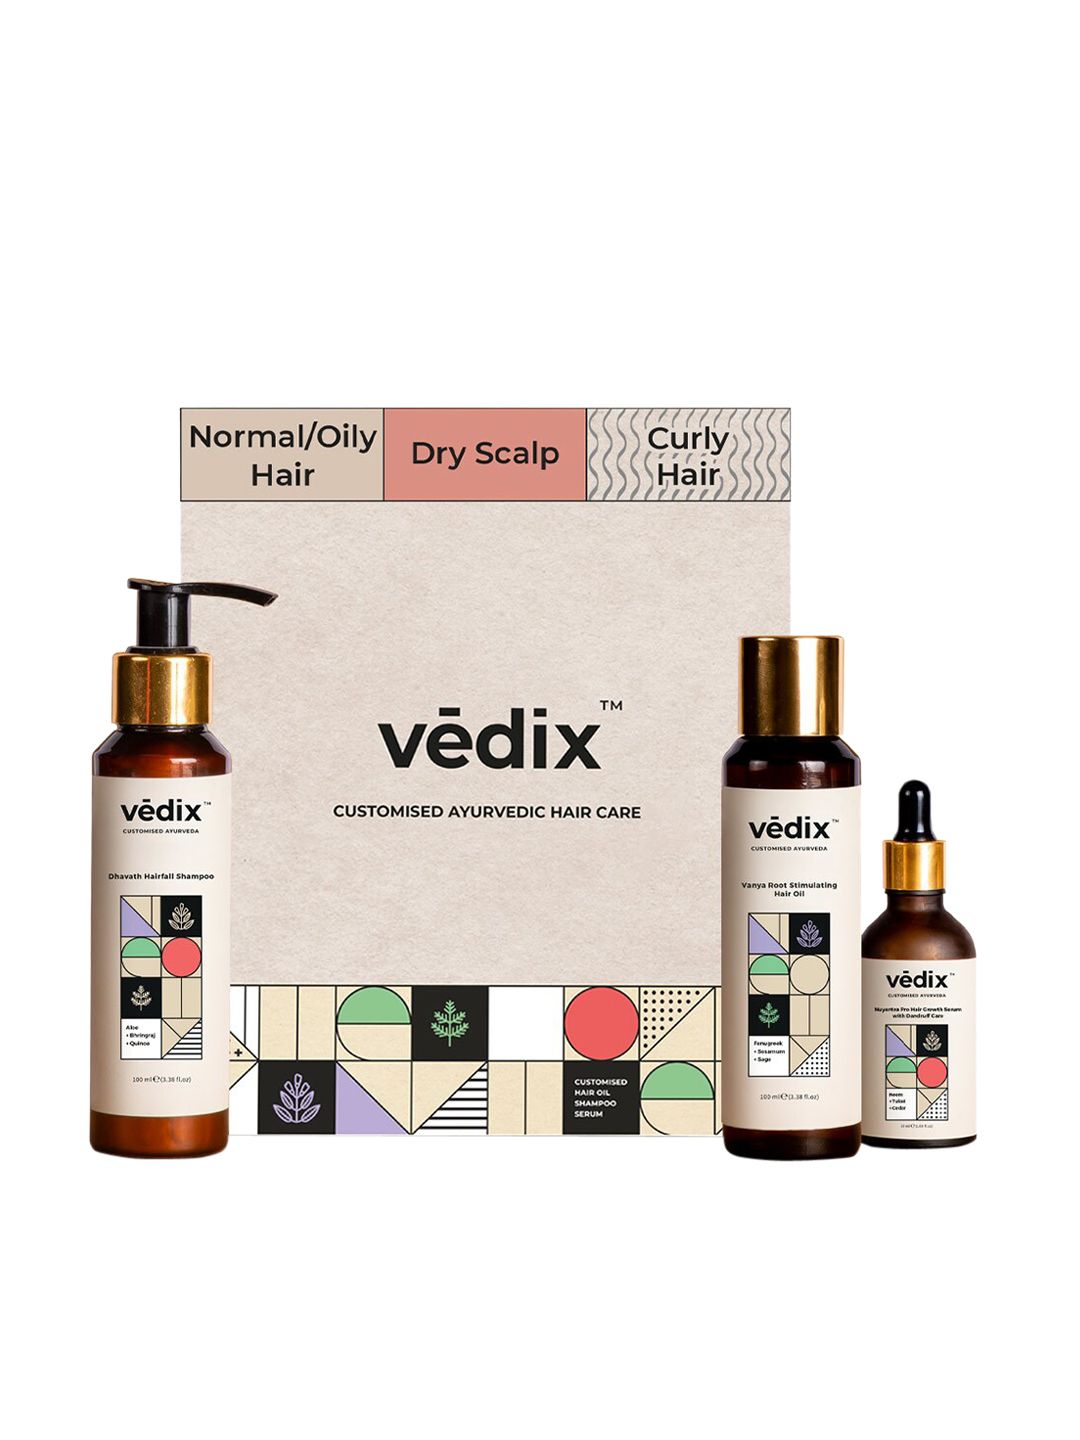 VEDIX Customized Hair Fall Control Regimen for Normal Hair - Dry Scalp+Curly Hair  540 gm Price in India